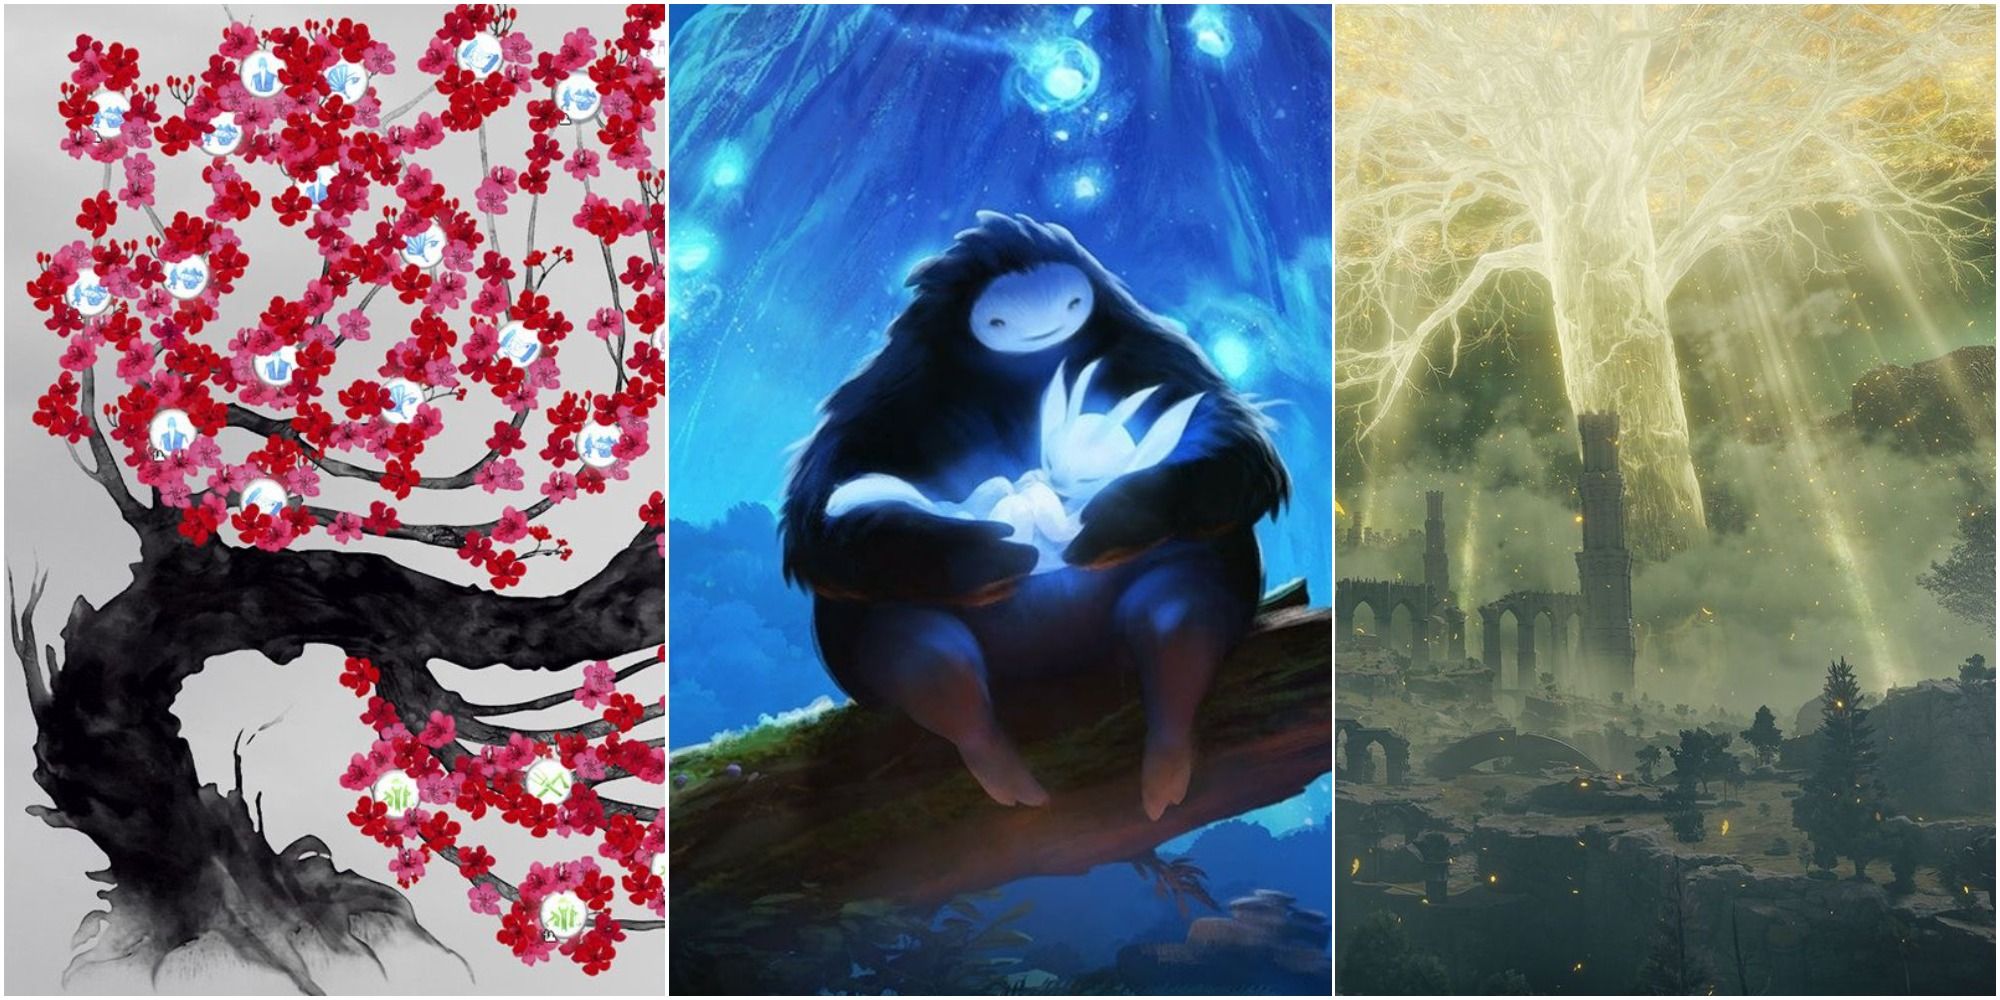 The reformw tree from Three Kingdoms, the cover art of Ori and the Blind Forest, and the Erdtree from Elden Ring